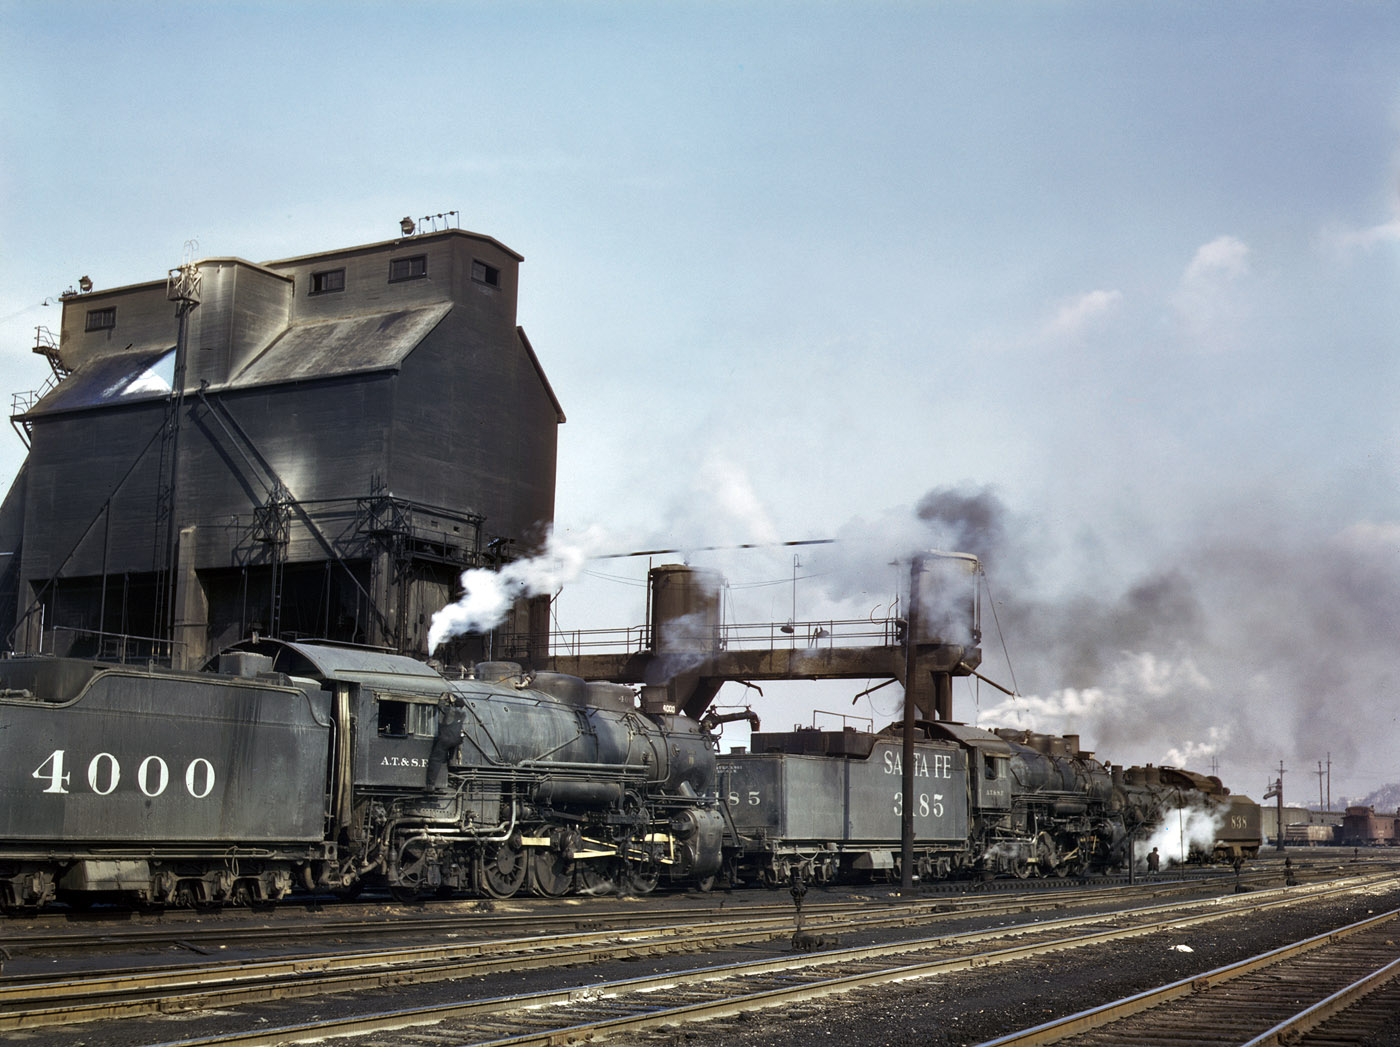 Coal and sand chutes at the Argentine Yard, Santa Fe R.R., Kansas City, Kansas. March 1943.  View full size. 4x5 Kodachrome transparency by Jack Delano.